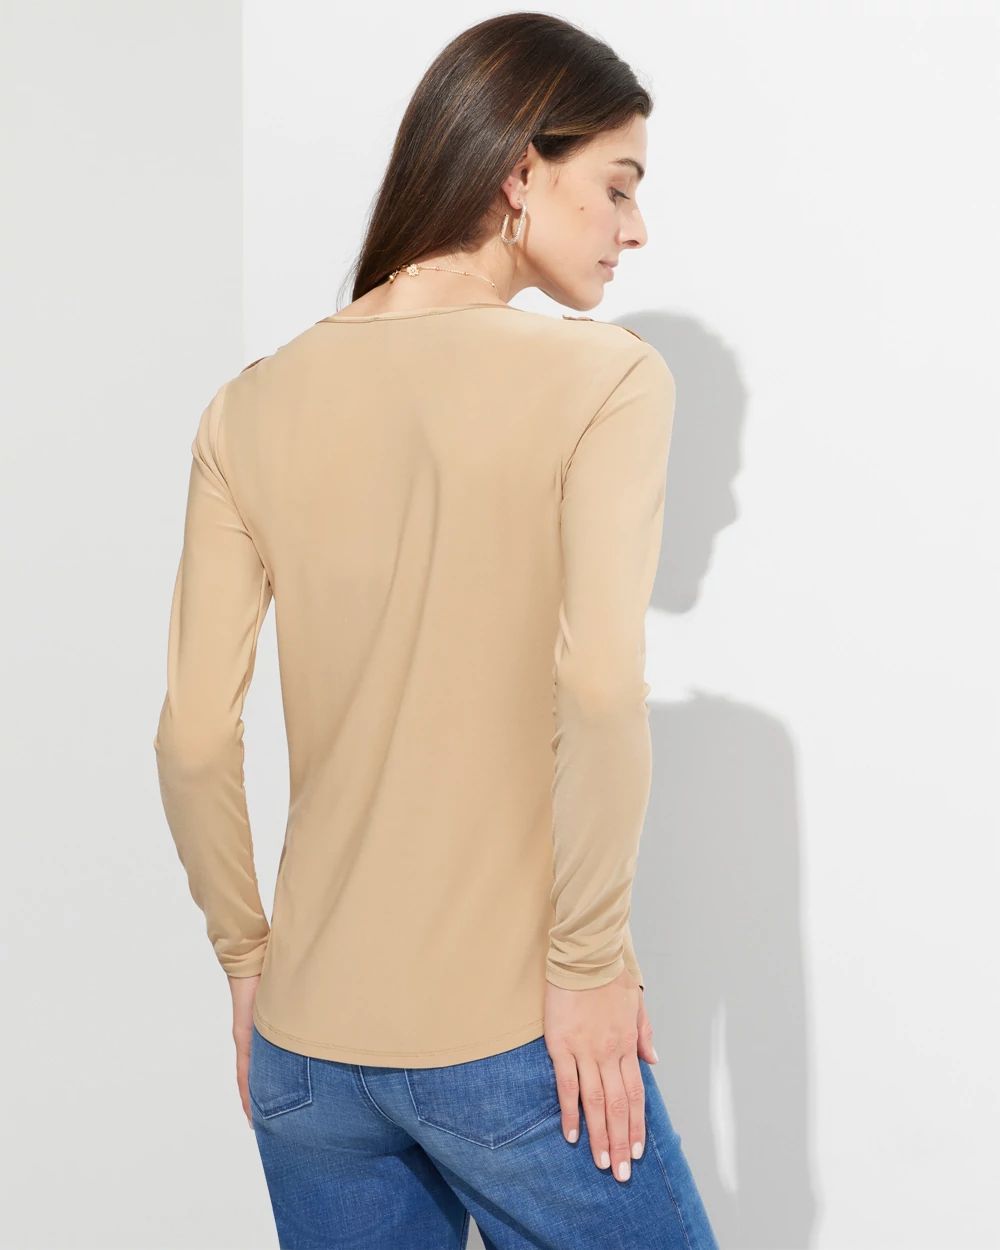 Outlet WHBM Long Sleeve Utility Tee click to view larger image.